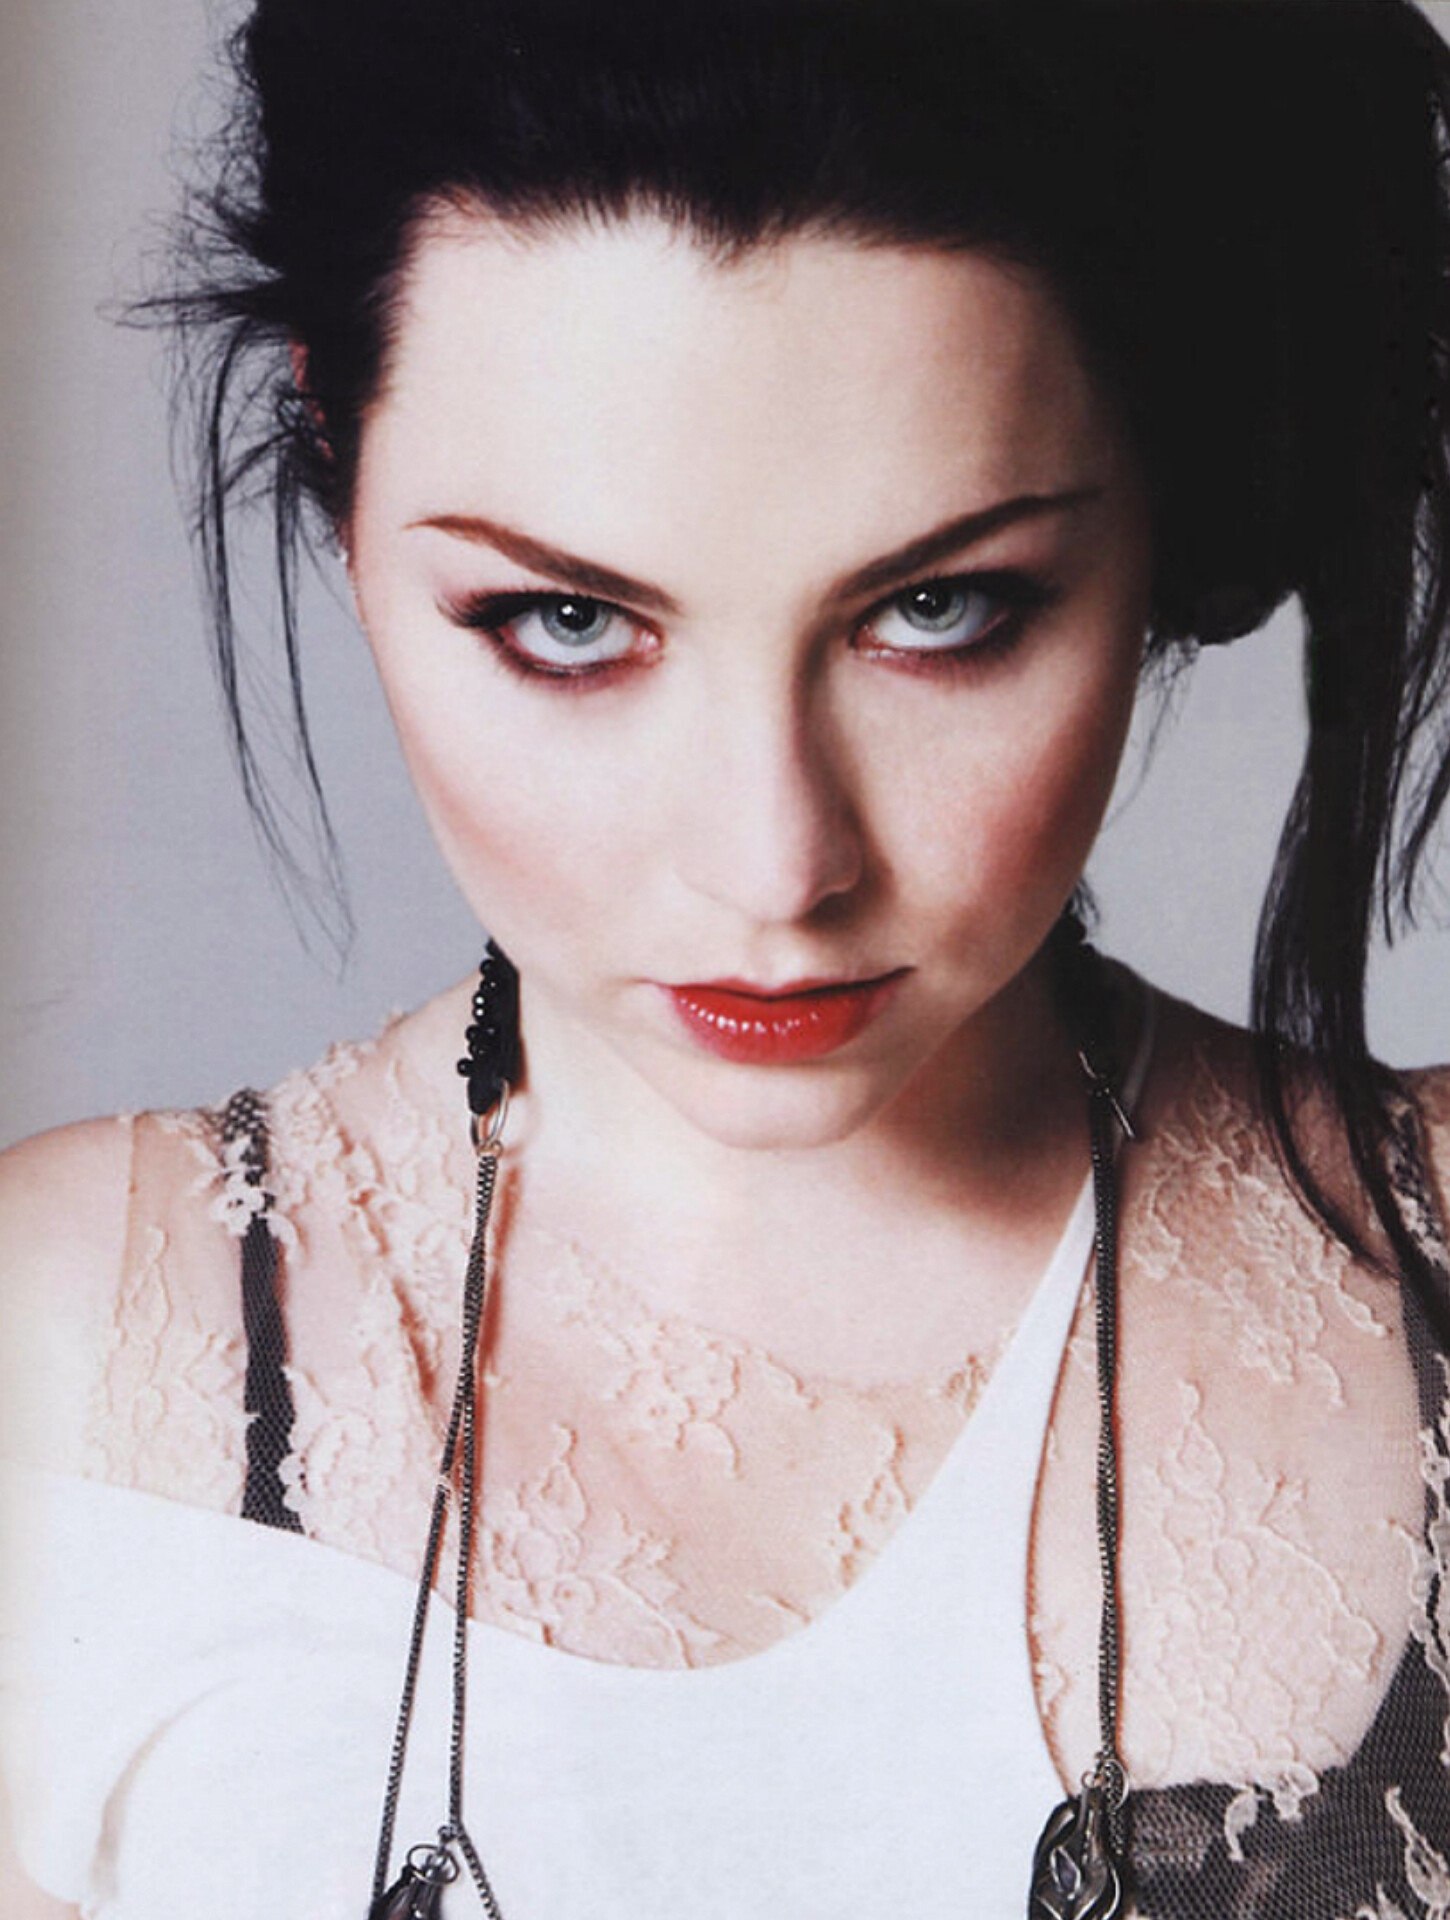 1450x1920
Keywords: amy lee;hq;photoshoot;the open door;2006;sesion